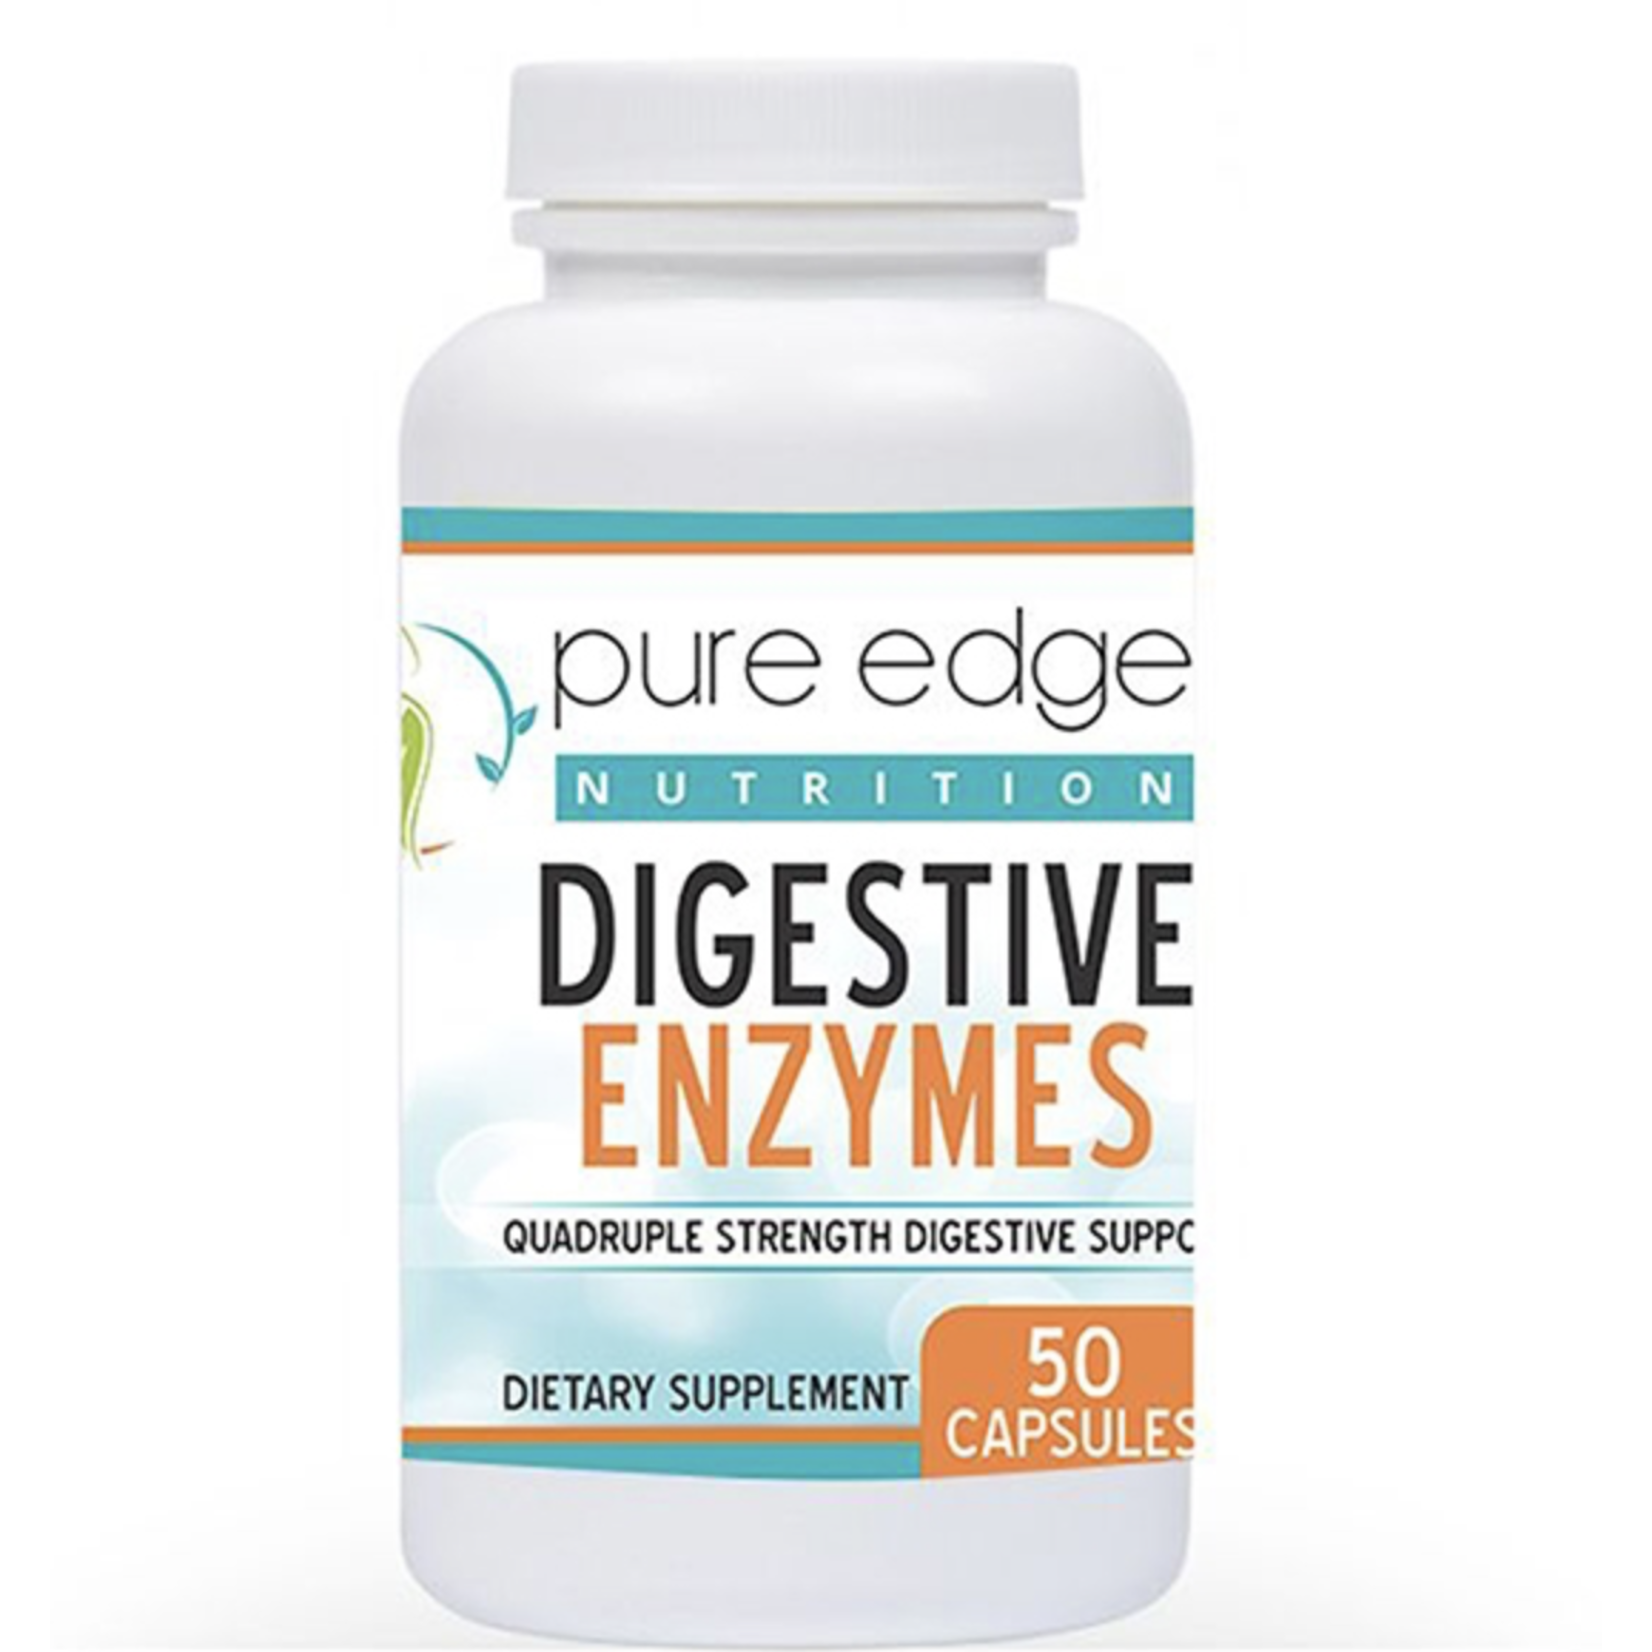 Pure Edge DIGESTIVE ENZYMES